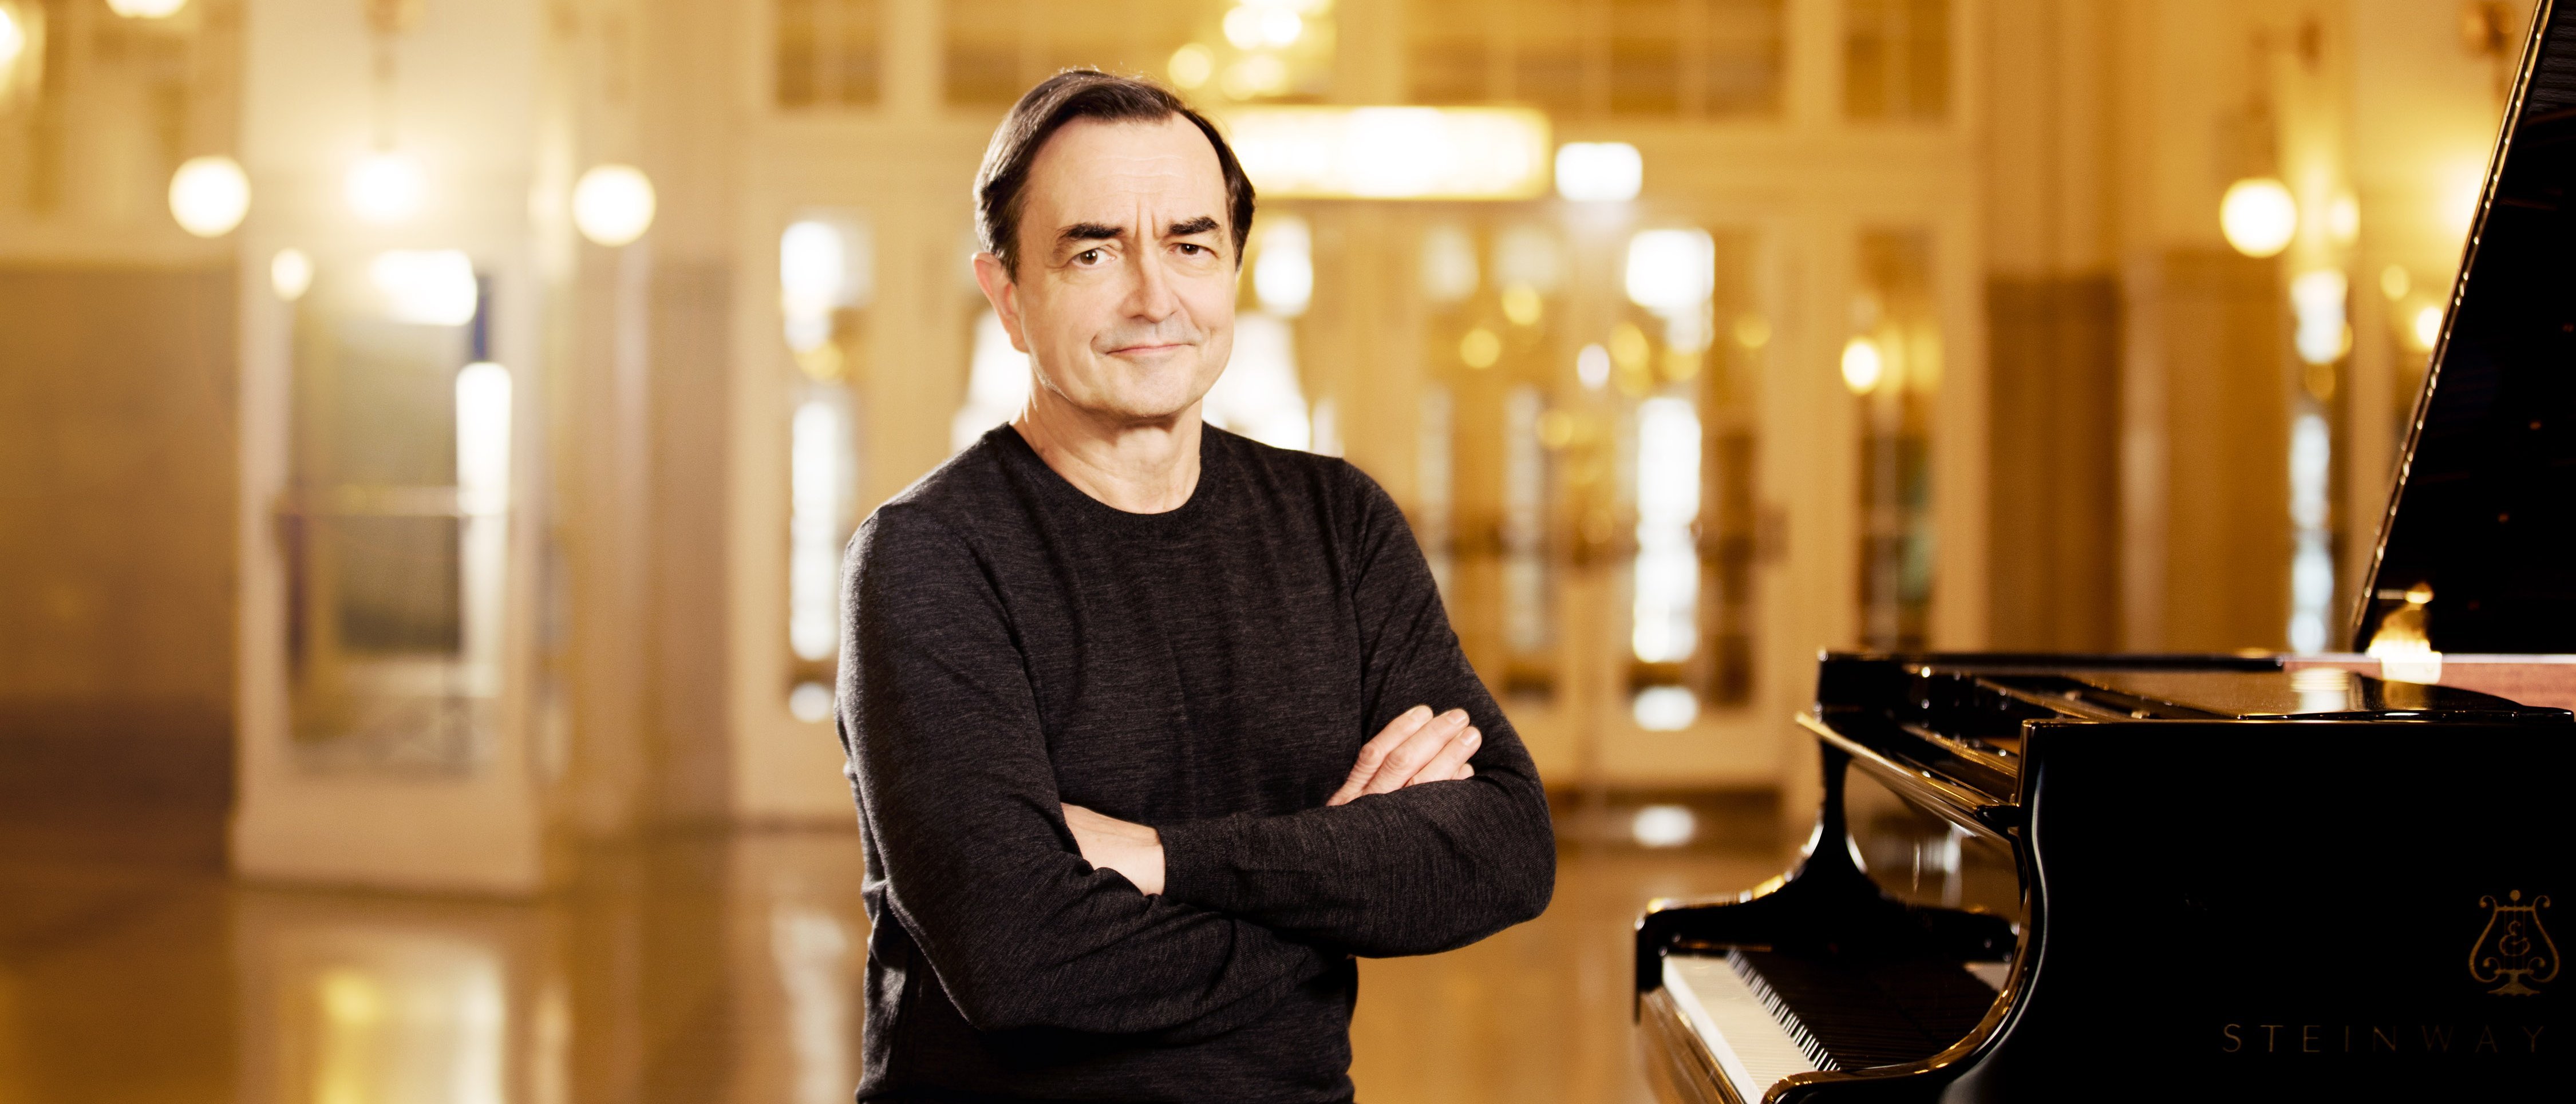 Pierre-Laurant Aimard sits in front of a grand piano in a large, illuminated room